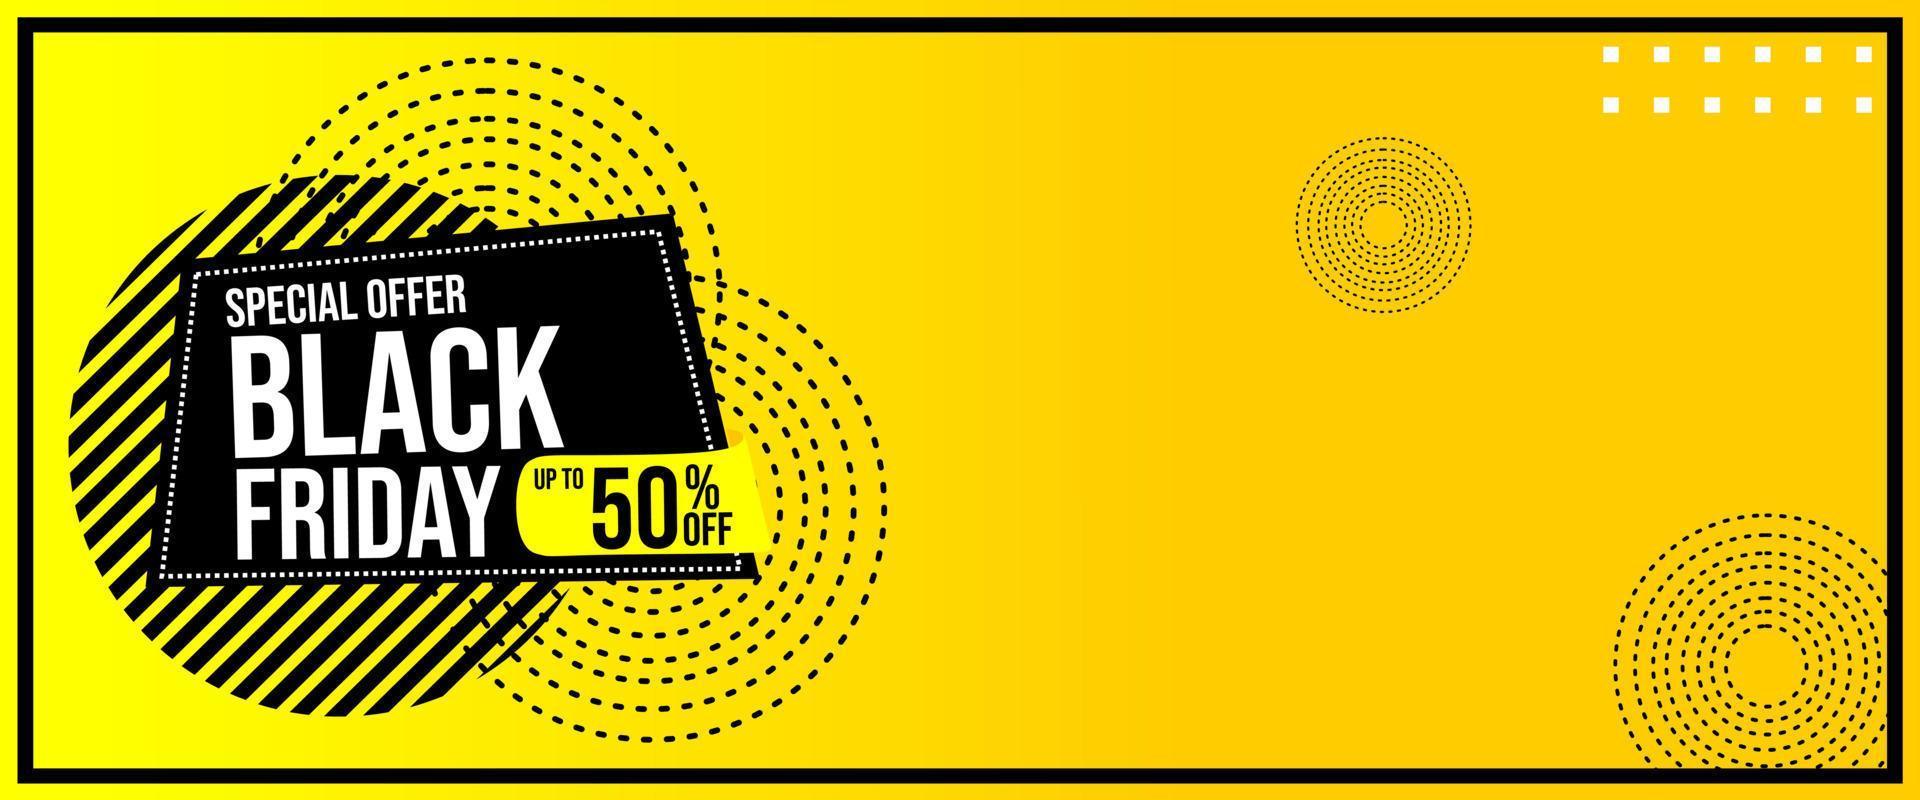 black friday advertising banner on blank yellow background. design for website and advertisement vector